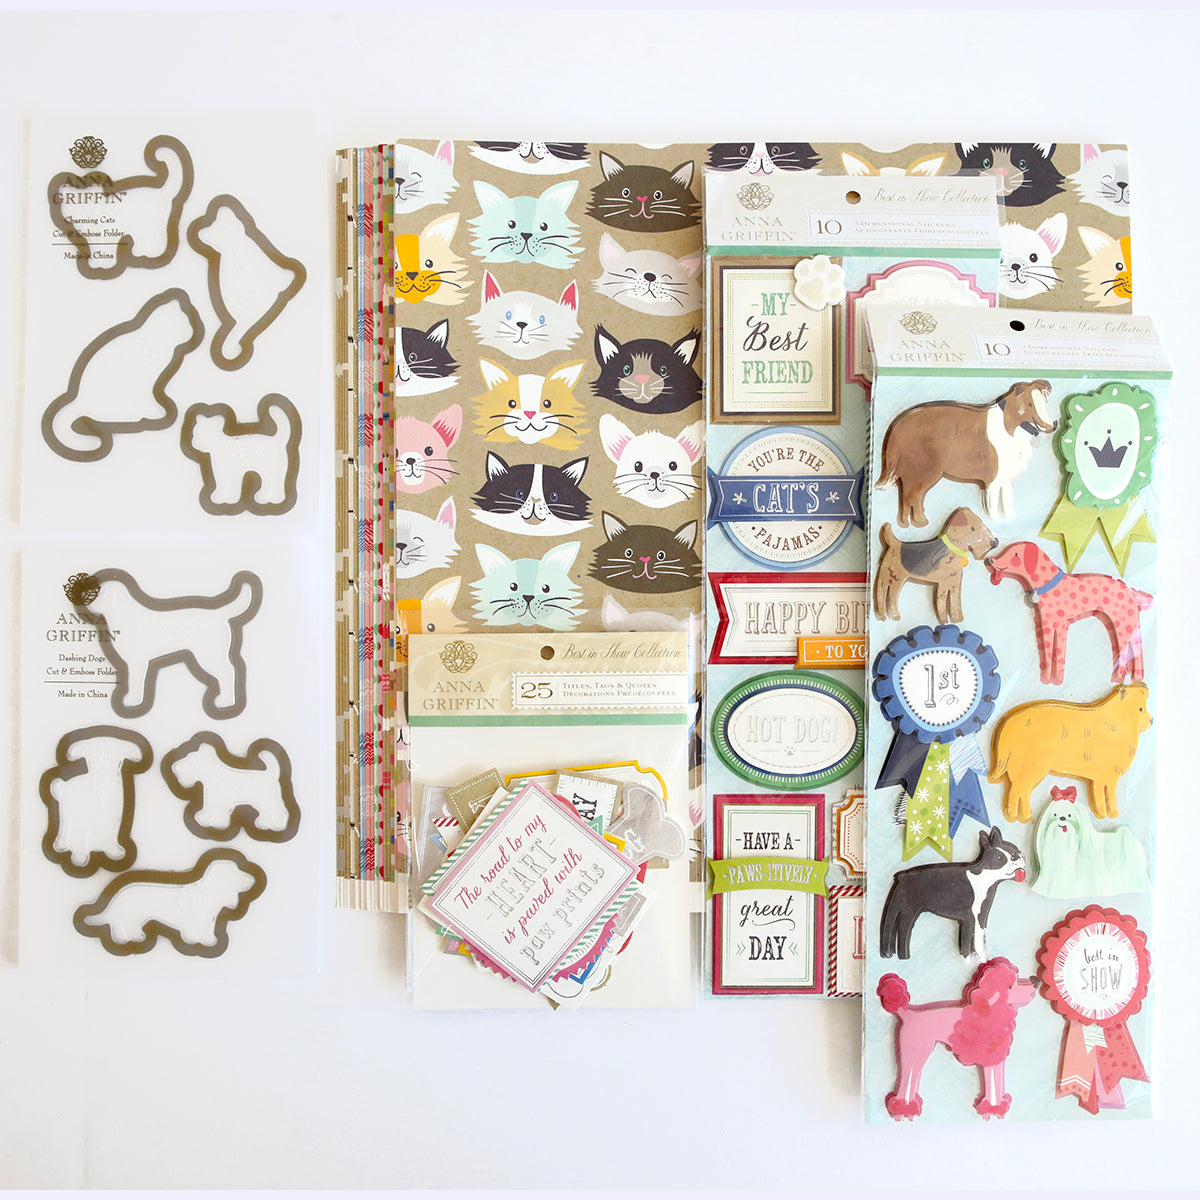 A collection of the "Best in Show Paper Crafting Collection," including cardstock and stickers, pet-themed scrapbooking supplies.